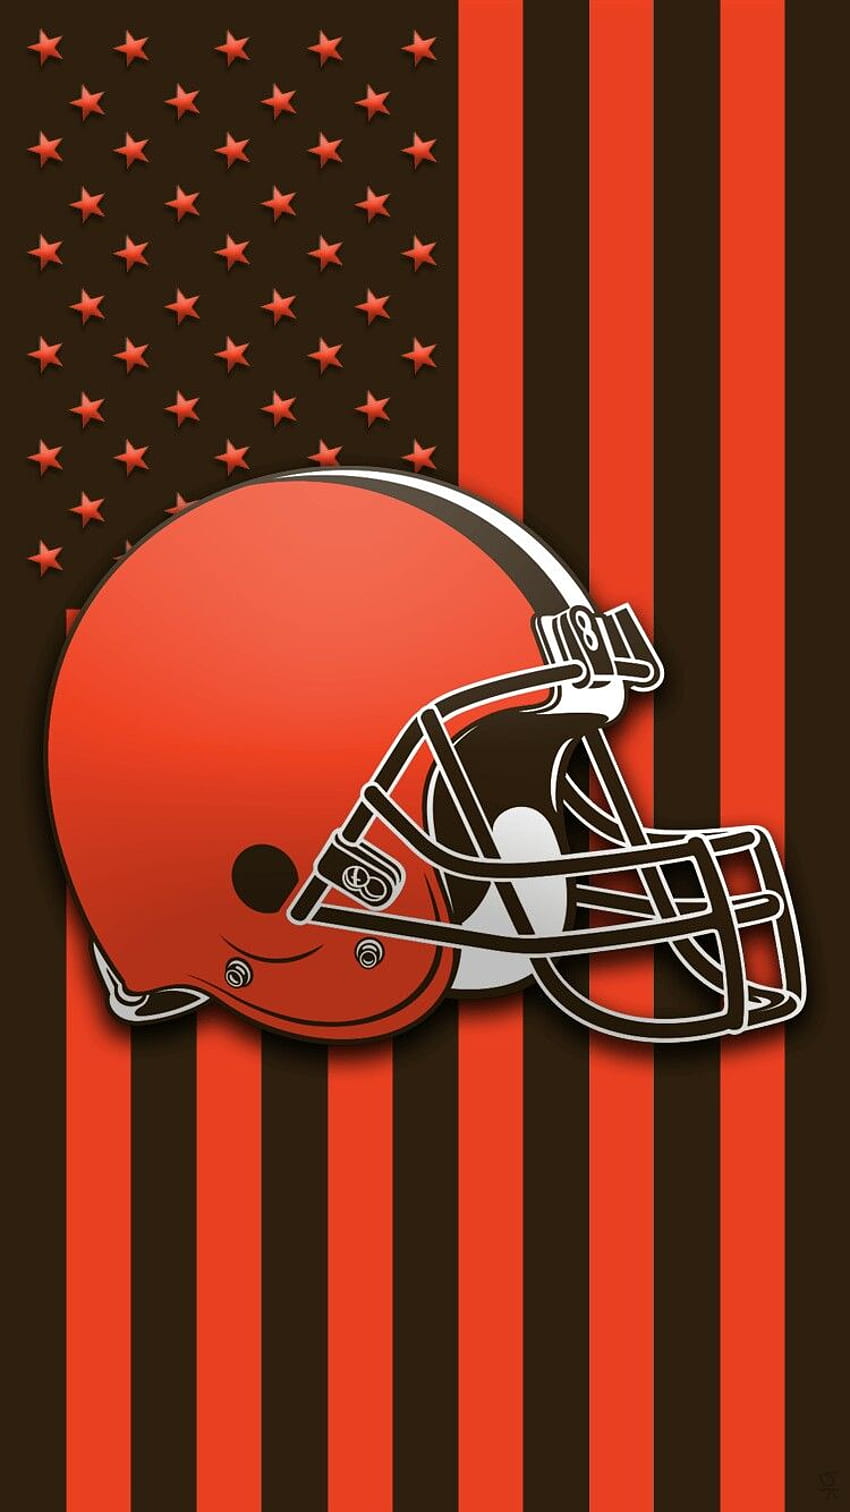 HD cleveland browns wallpapers  Peakpx